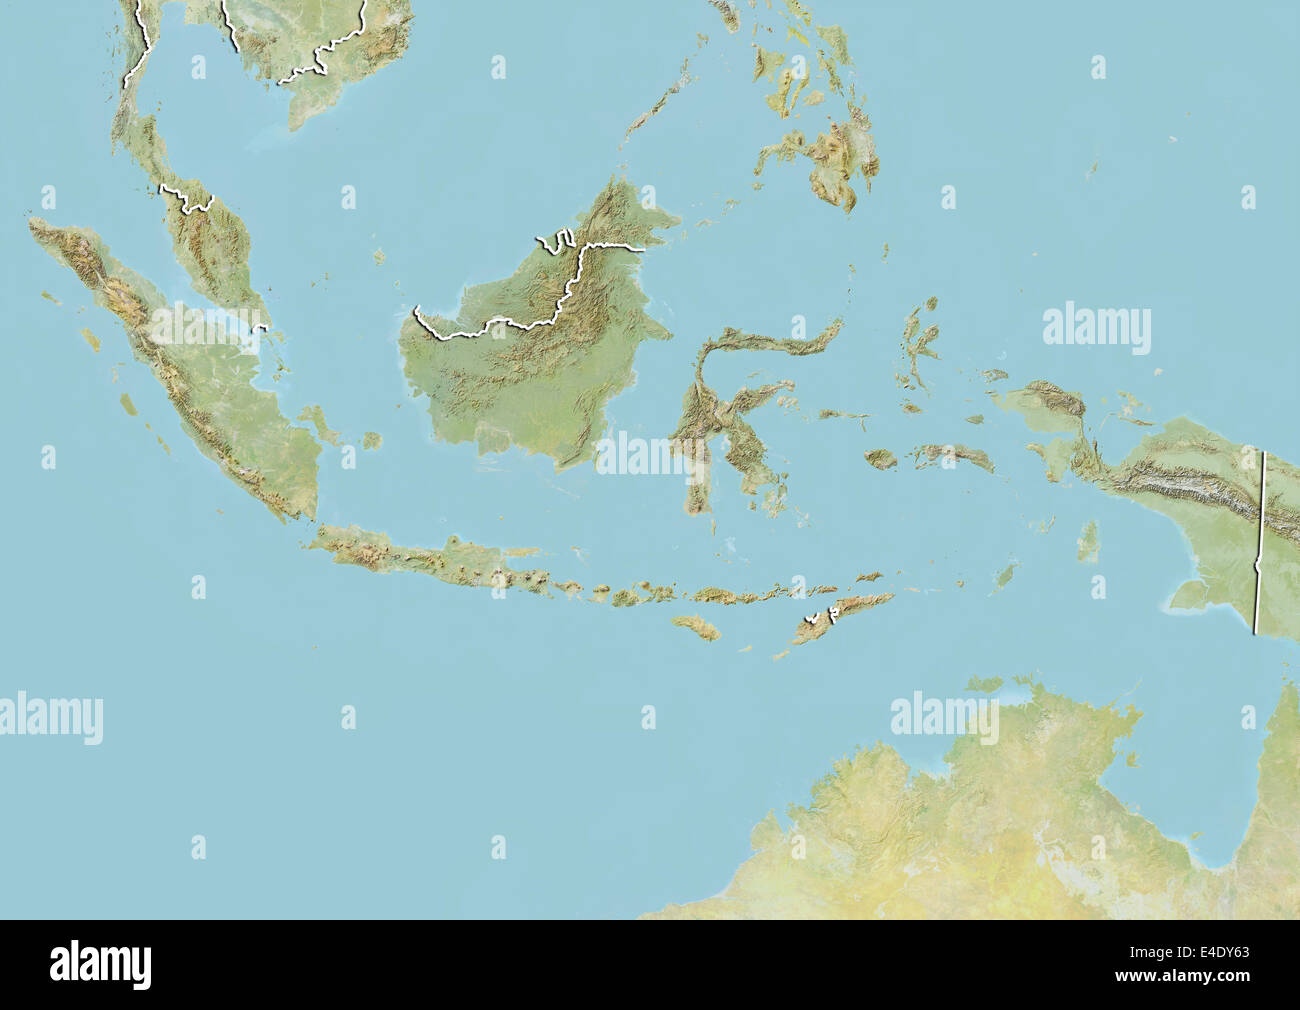 Indonesia, Relief Map With Border Stock Photo